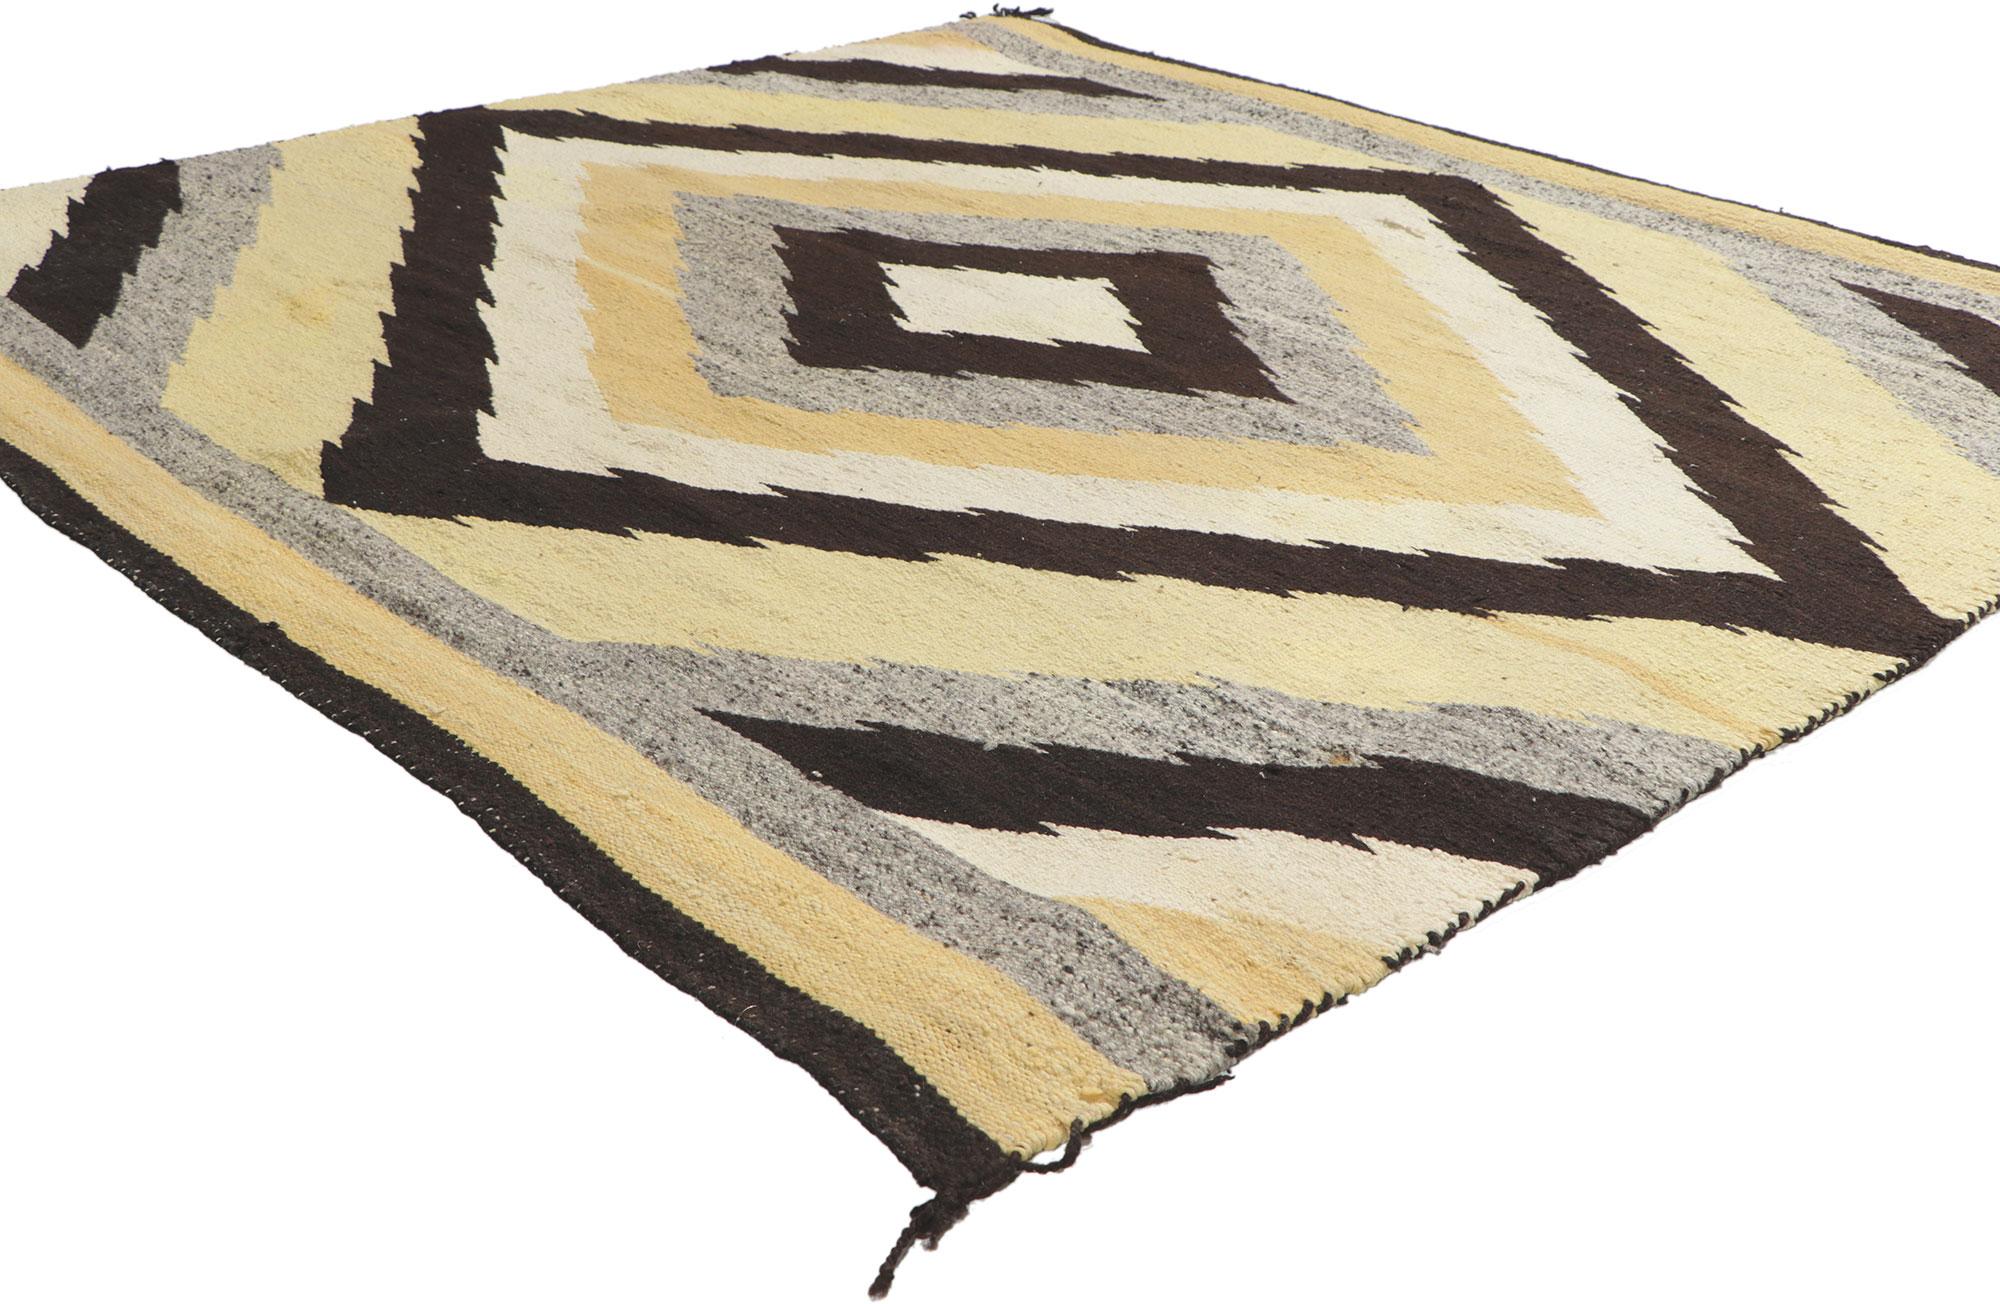 78503 Antique Eye Dazzler Navajo rug, 04'08 x 04'11. With its Two Grey Hills style, incredible detail and texture, this handwoven Navajo rug is a captivating vision of woven beauty. The striking Eye Dazzler pattern and earthy colorway woven into